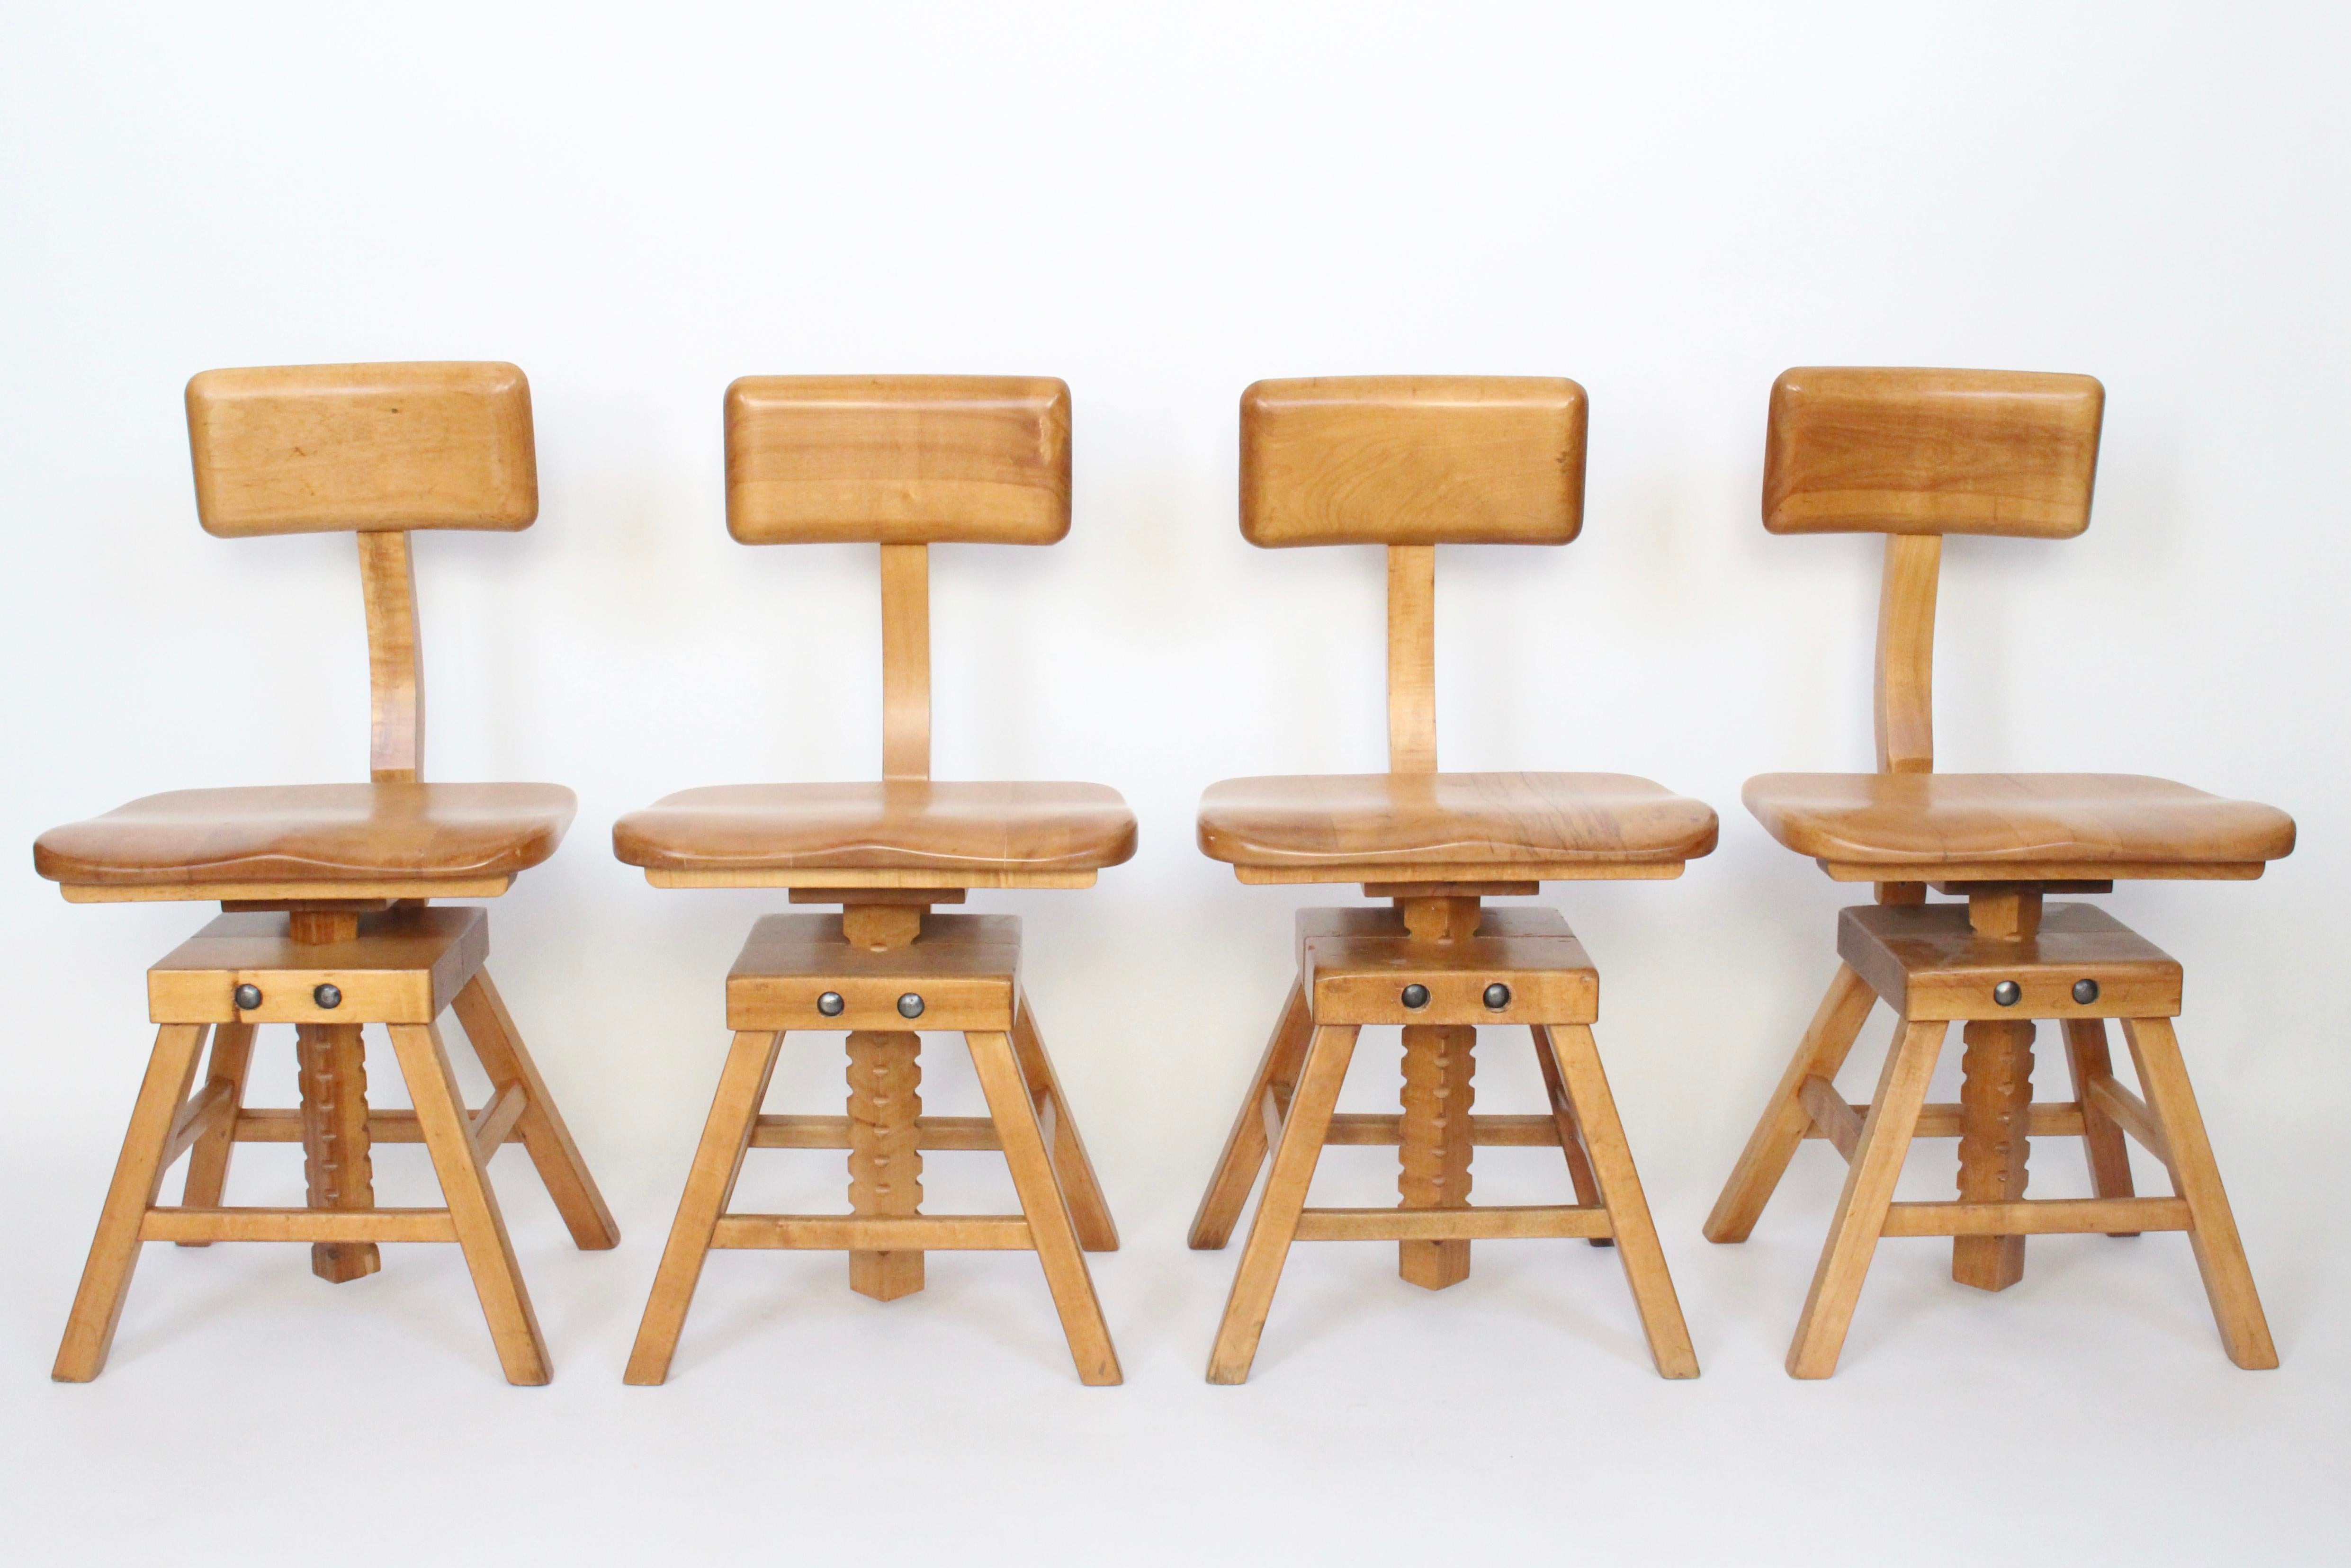 Set of 4 sit-rite solid maple drafting chairs, manufactured by the Edward L. Koenig Co. of Chicago, Illinois. This versatile, sturdy set features 3 areas, (seat, back and height), easily adjustable by wingnuts for maximum comfort. Chair seat height